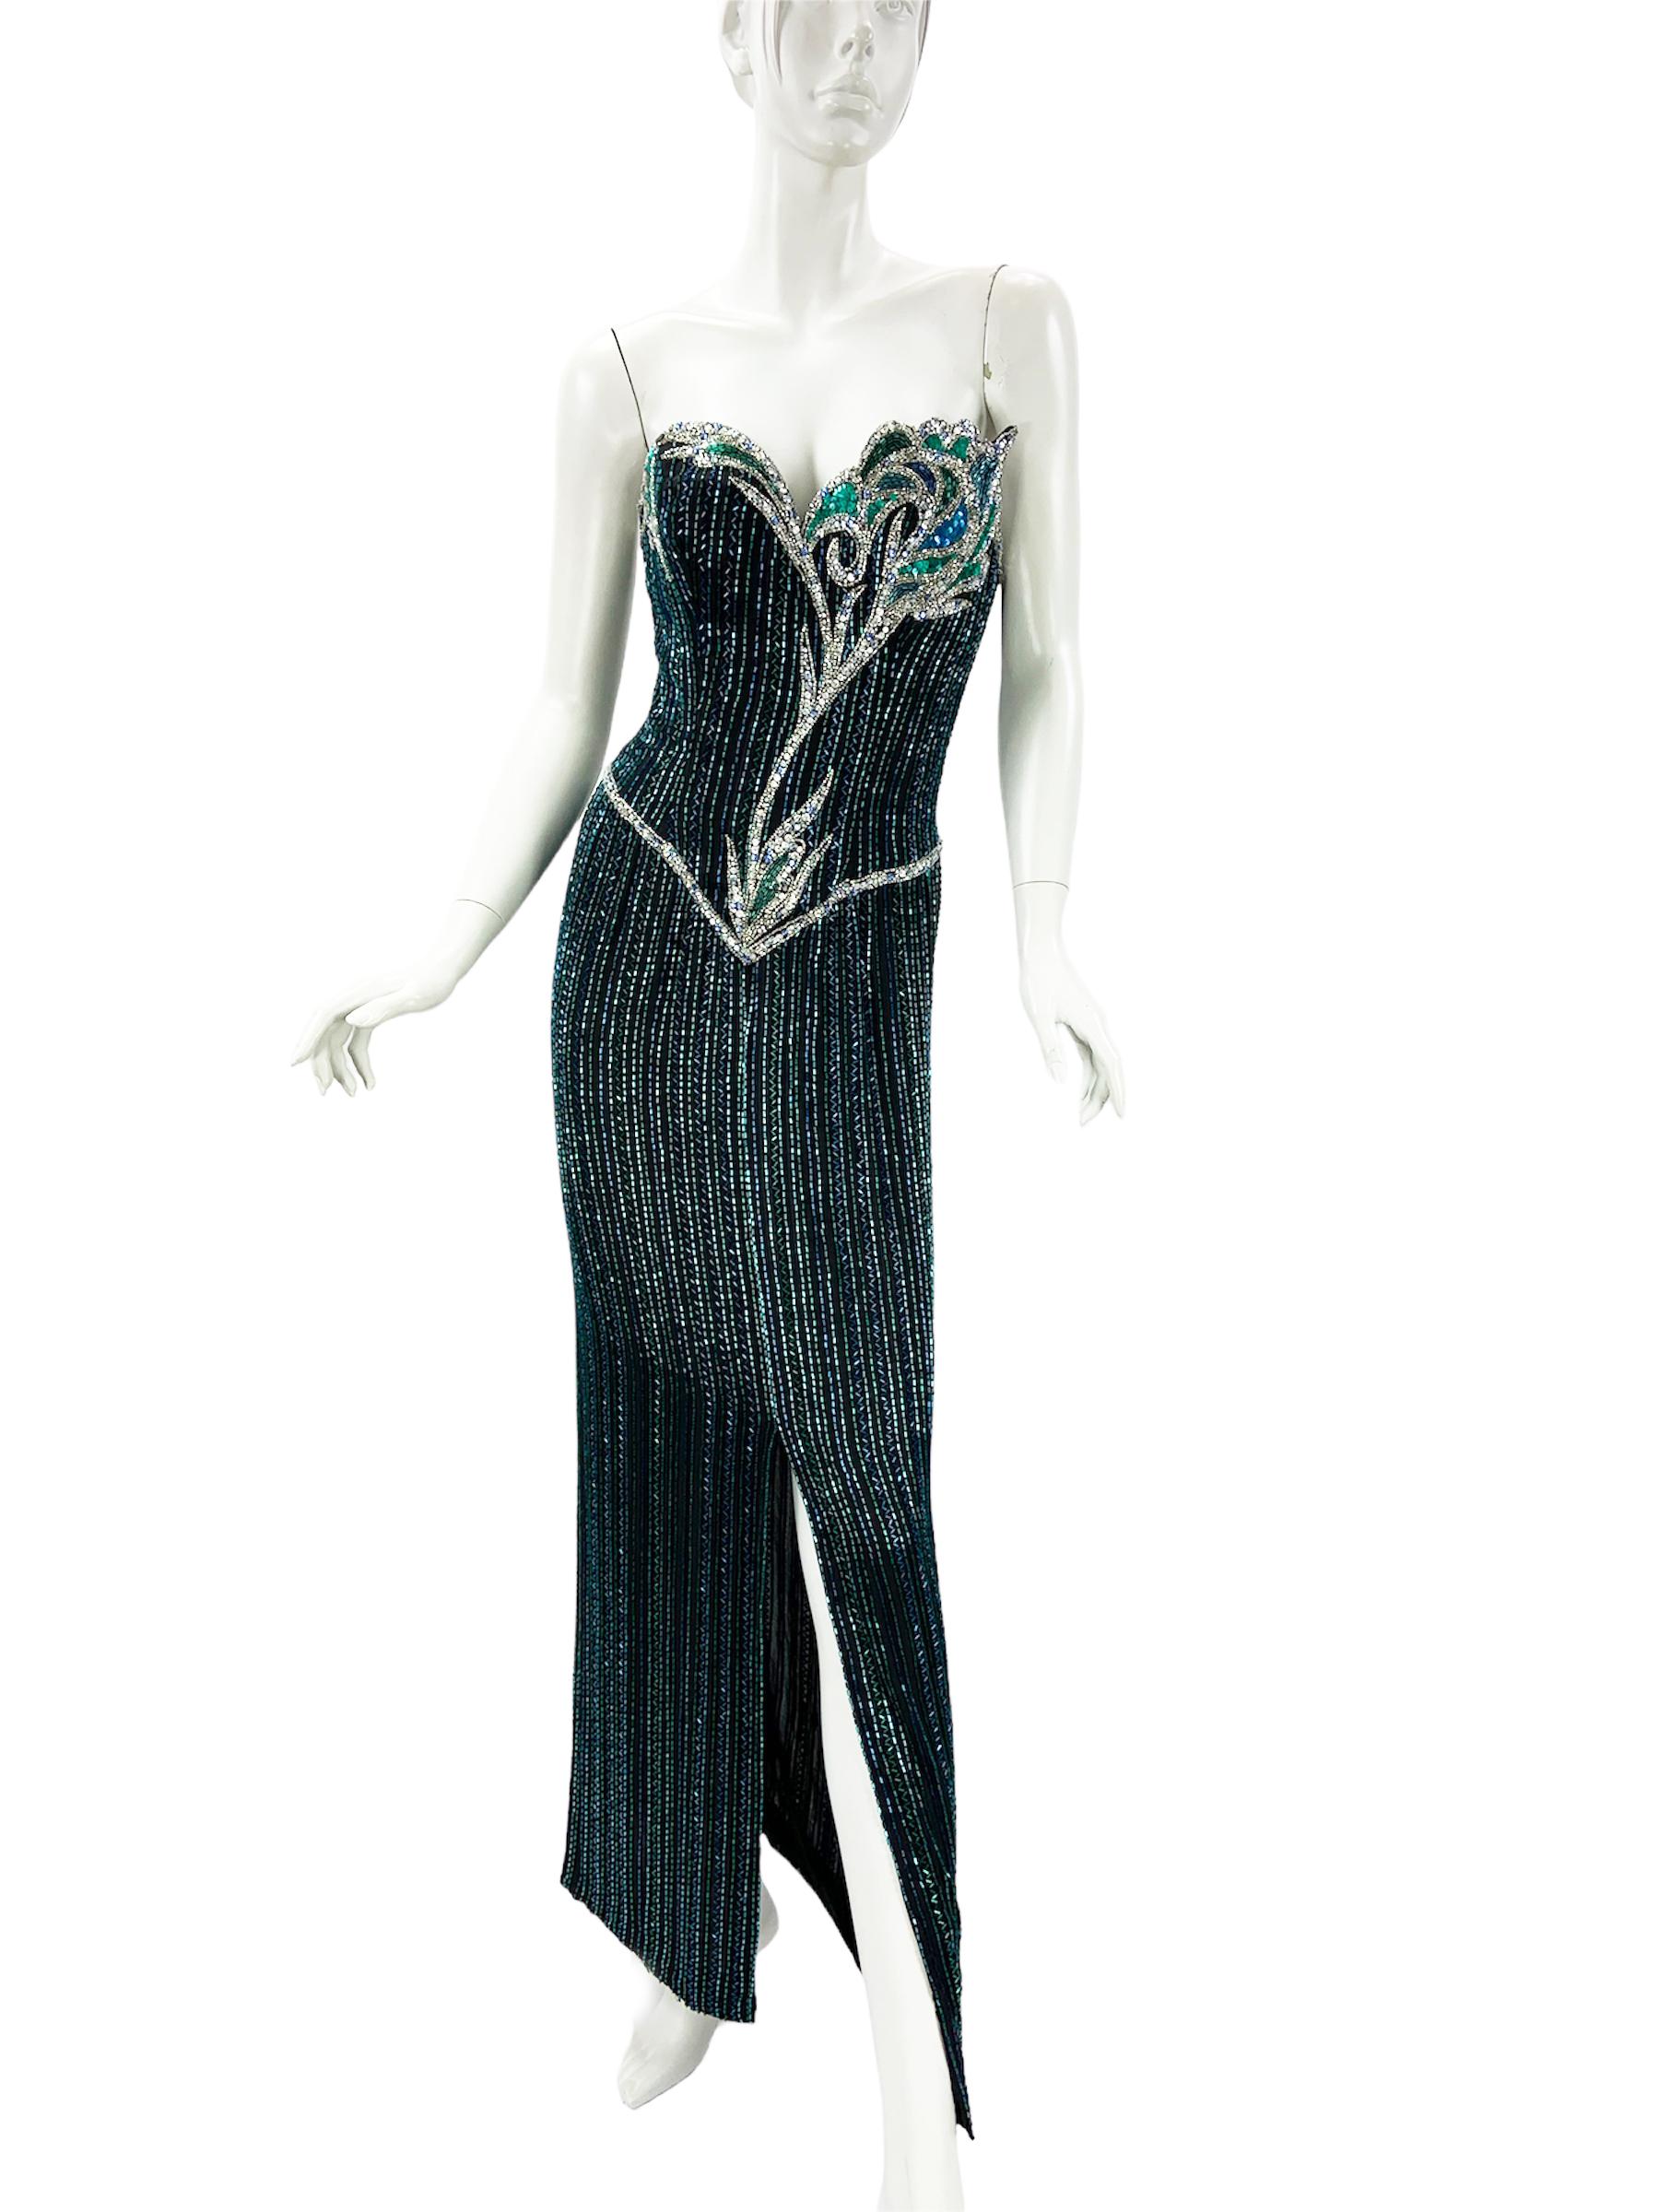 Vintage 80's Bob Mackie Boutique Green Blue Fully Beaded Silk Evening Dress Gown
Designer size 8 ( modern size will be smaller - pls. check measurements).
Hand Beaded, Thousands Green, Blue and Silver tone Beads and Sequins Over the Black Silk,